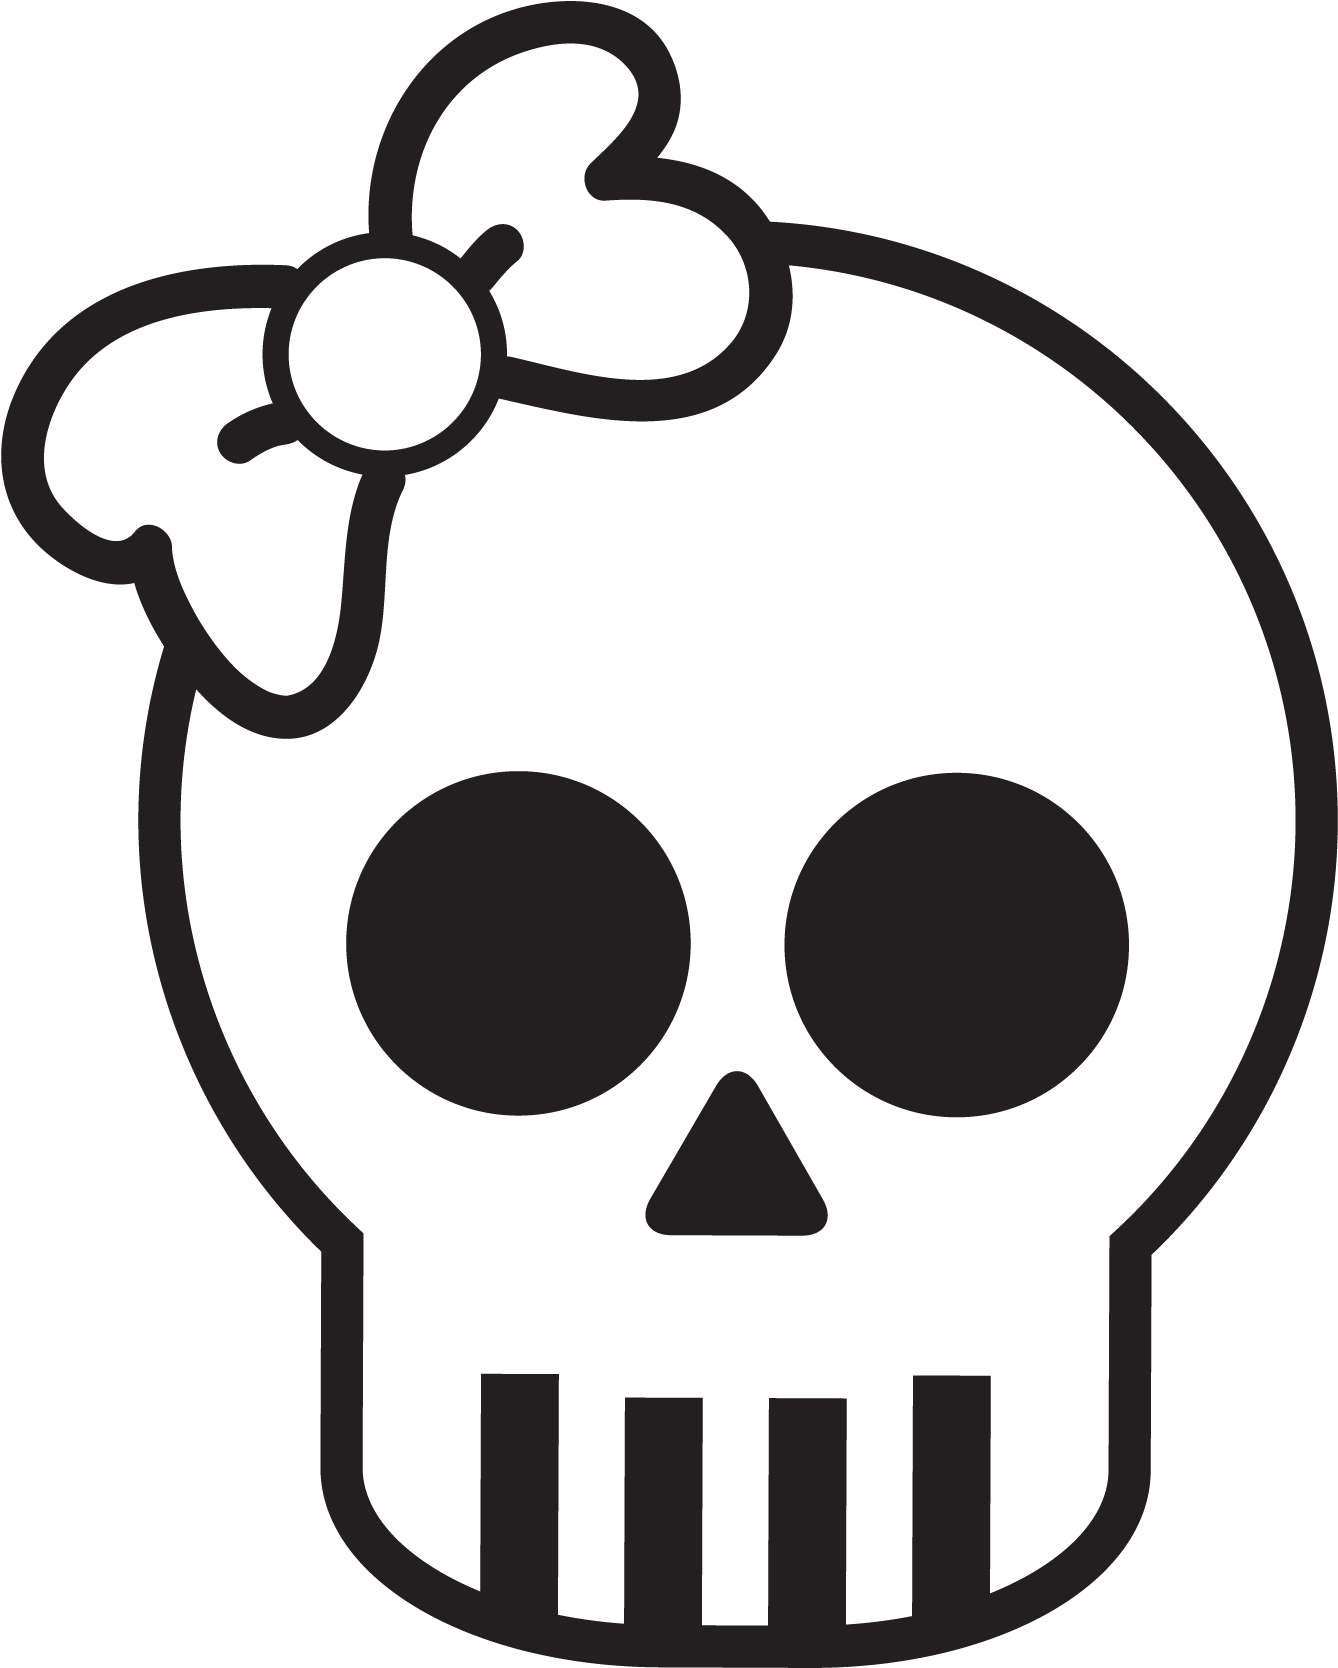 Skull Decal With Bow - Human Skull Symbolism (1875x1875)